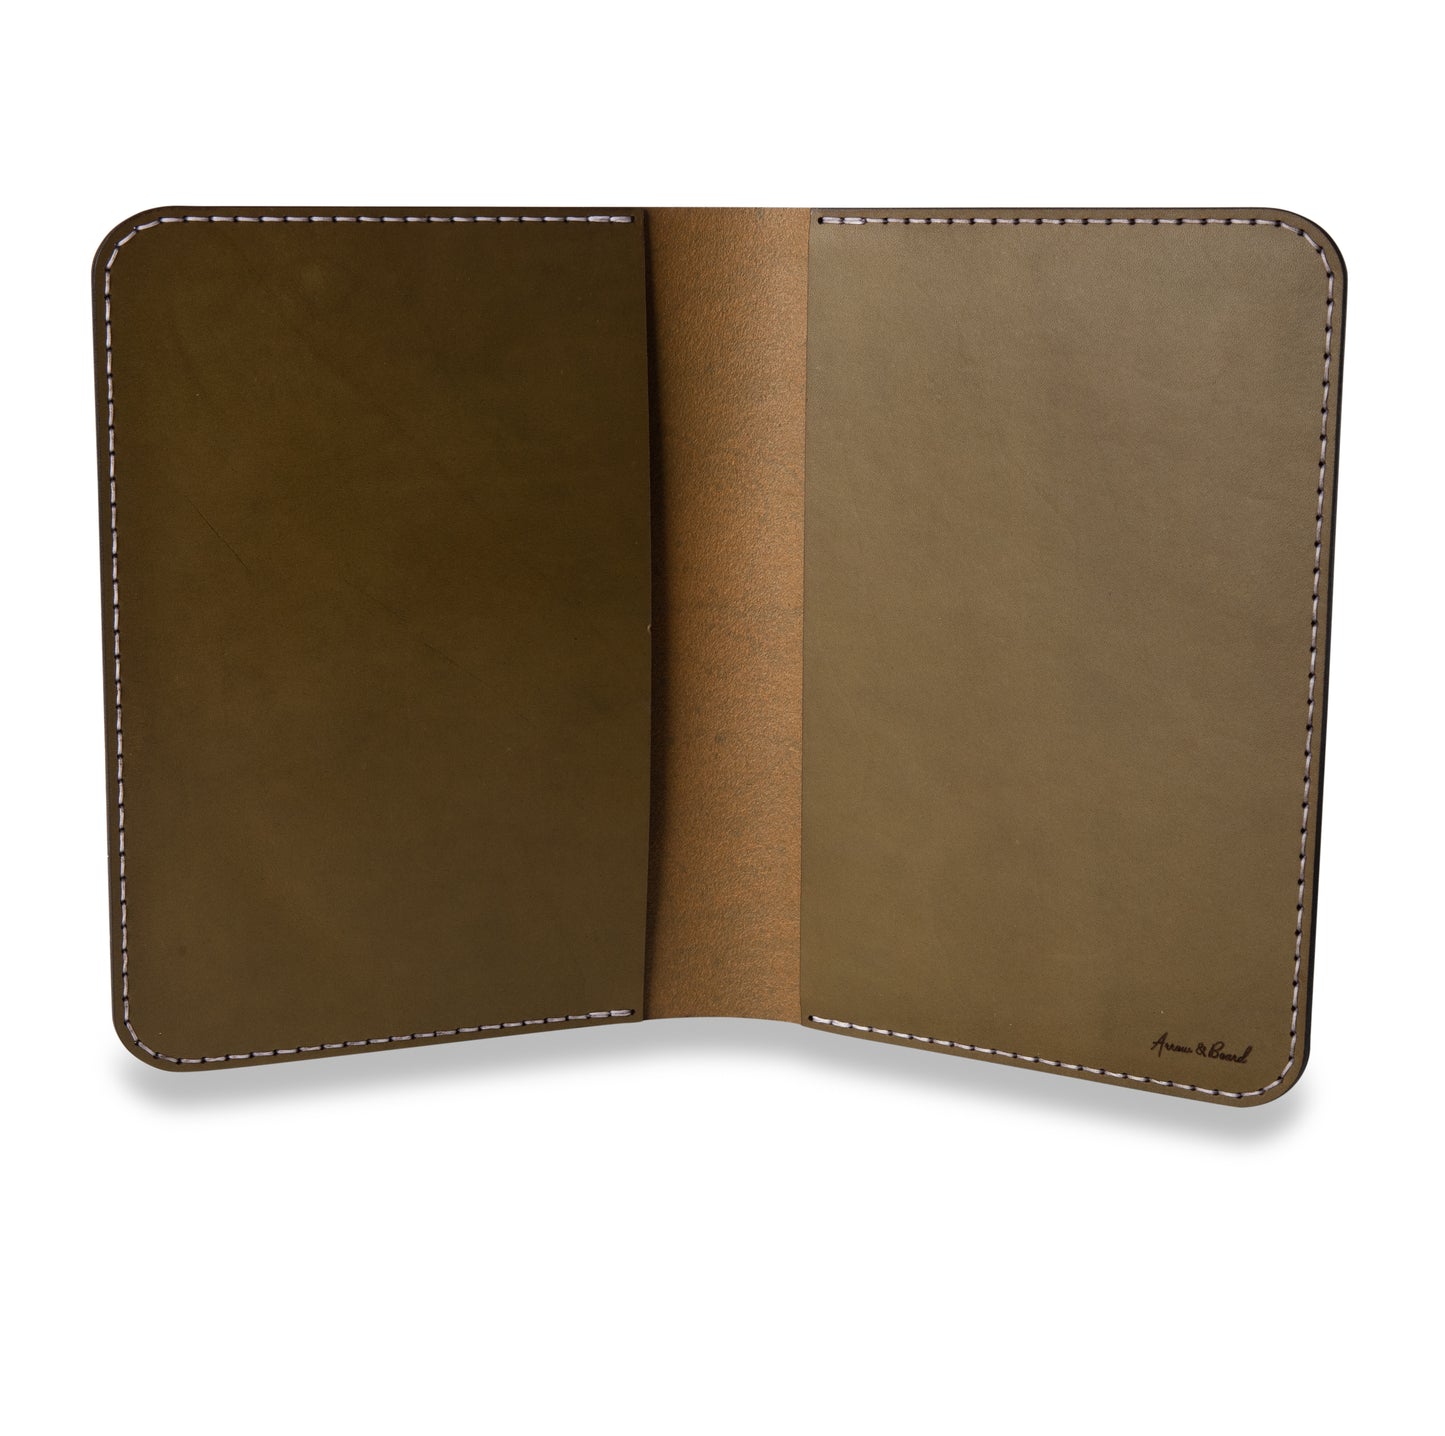 Leather Journal Cover w/ Notebook - Olive